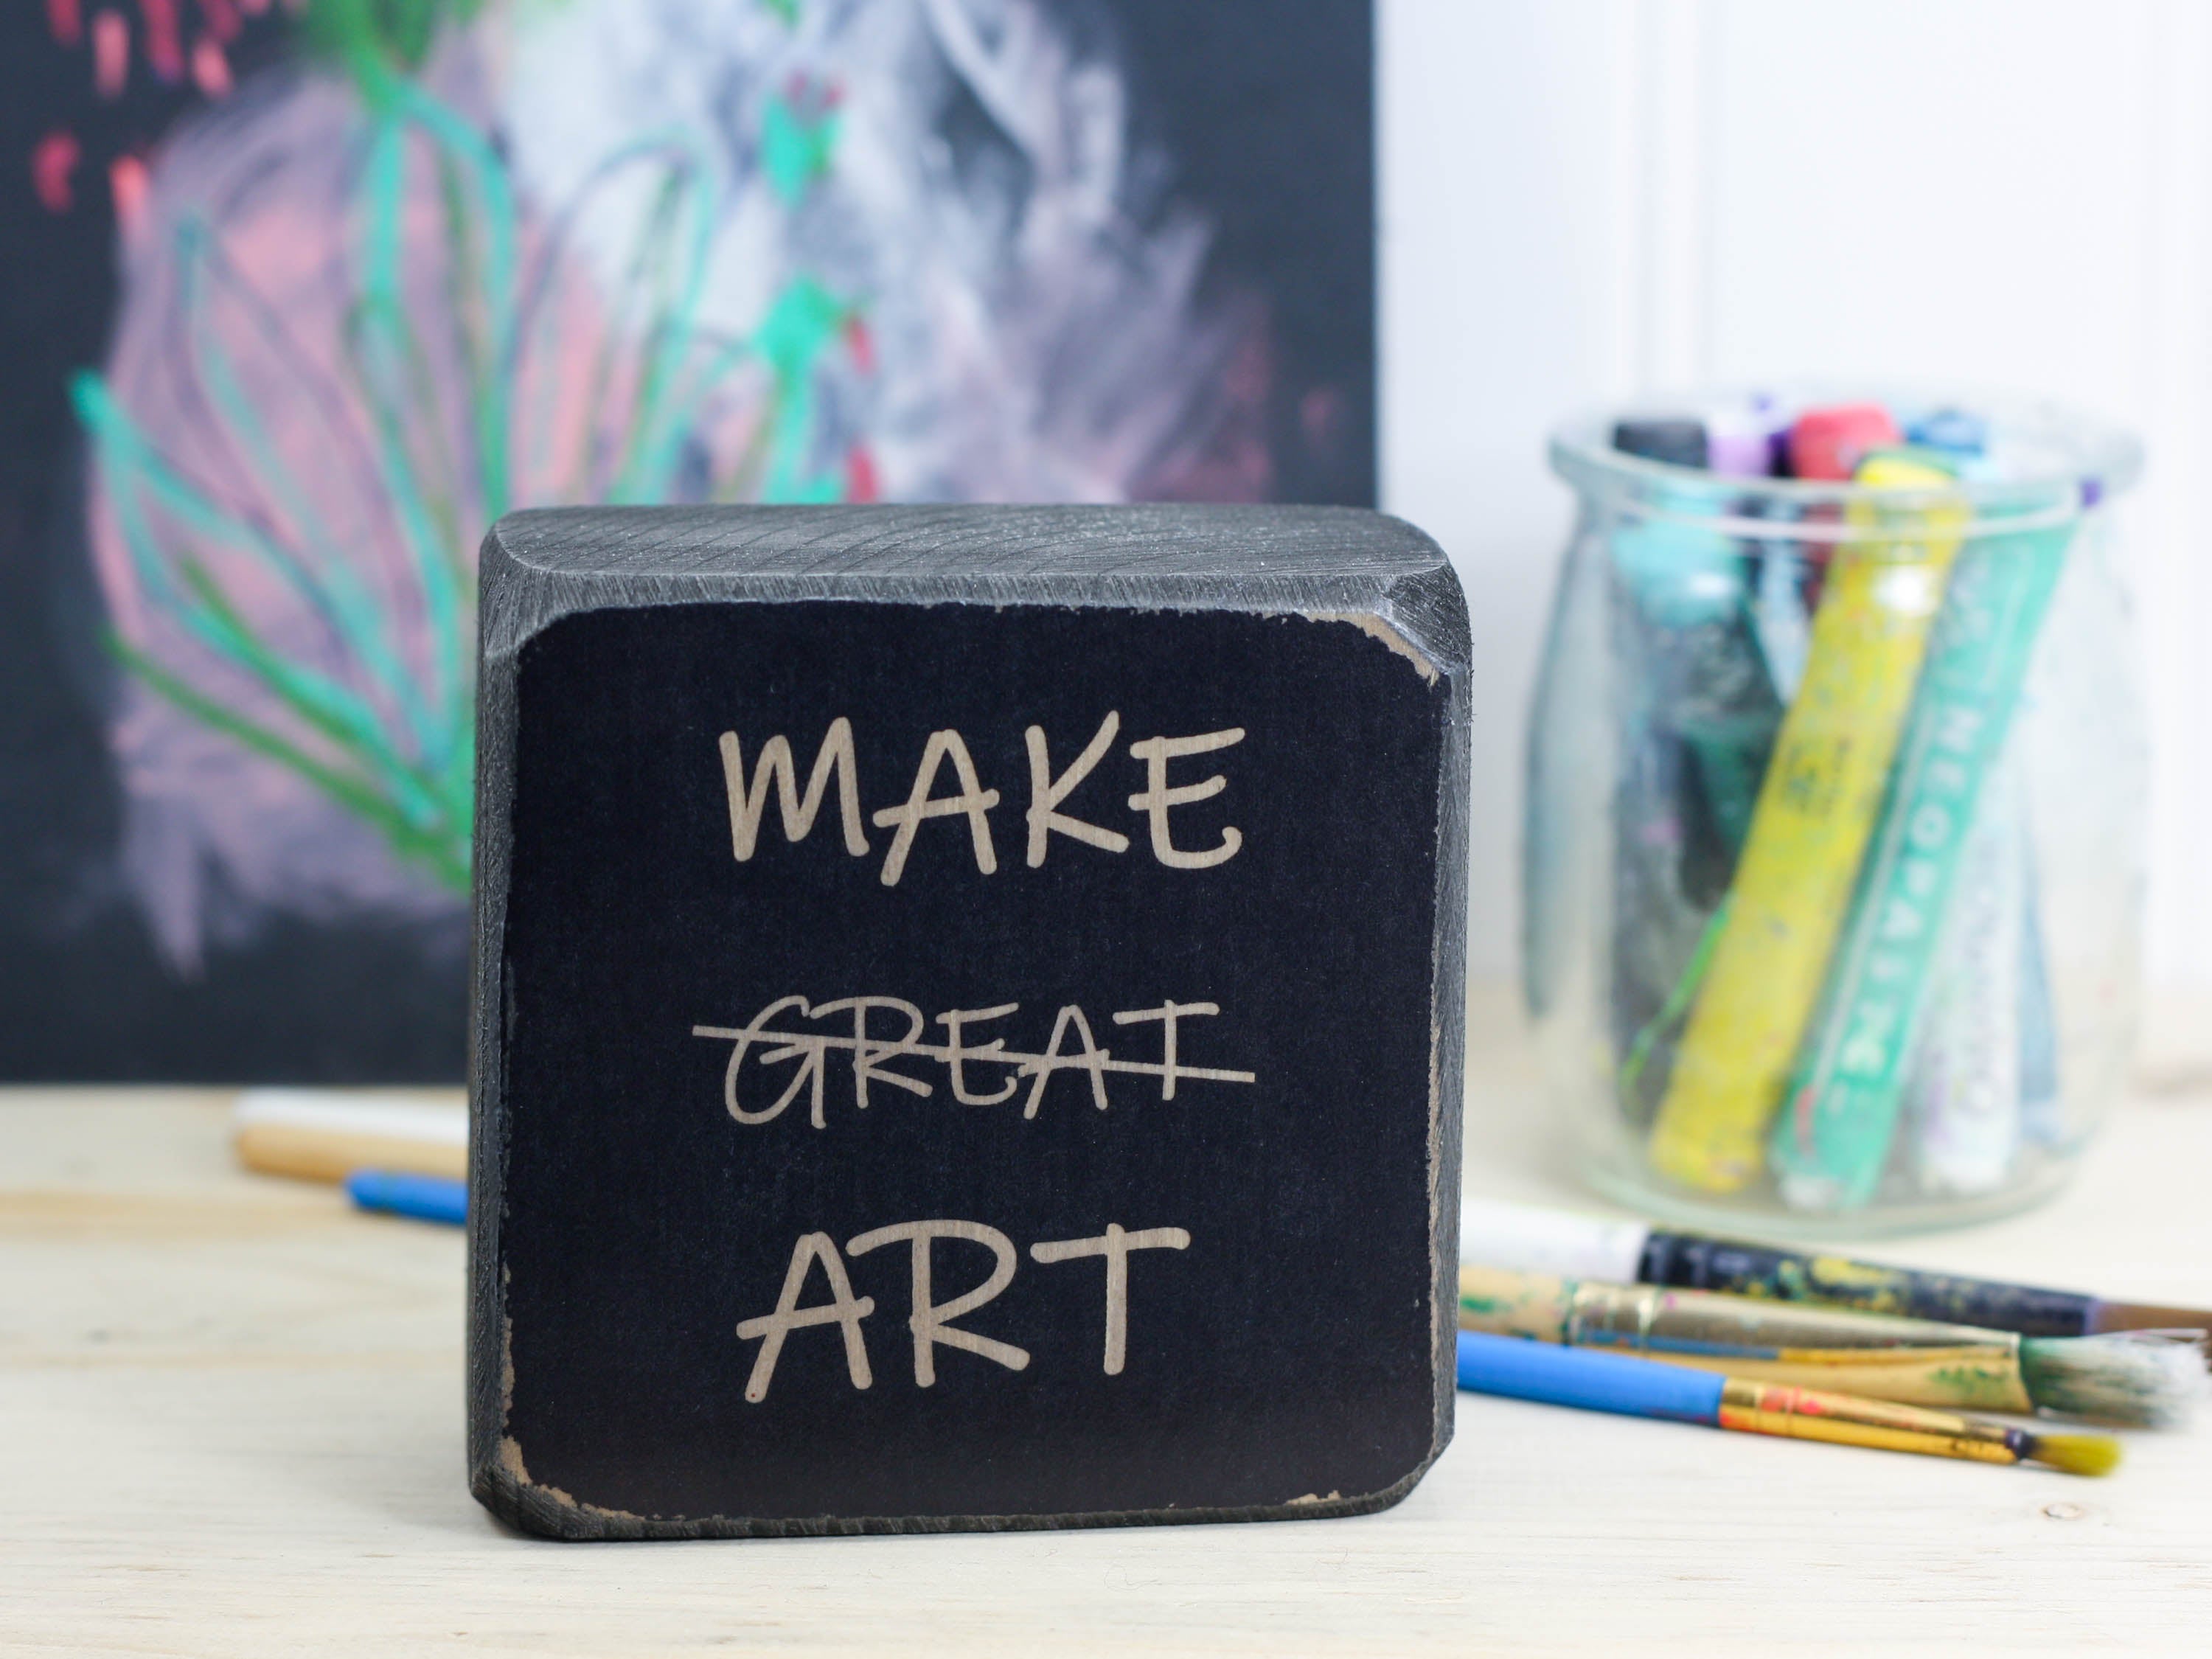 small freestanding sign in distressed black with the text "Make great art" and the word great is crossed out